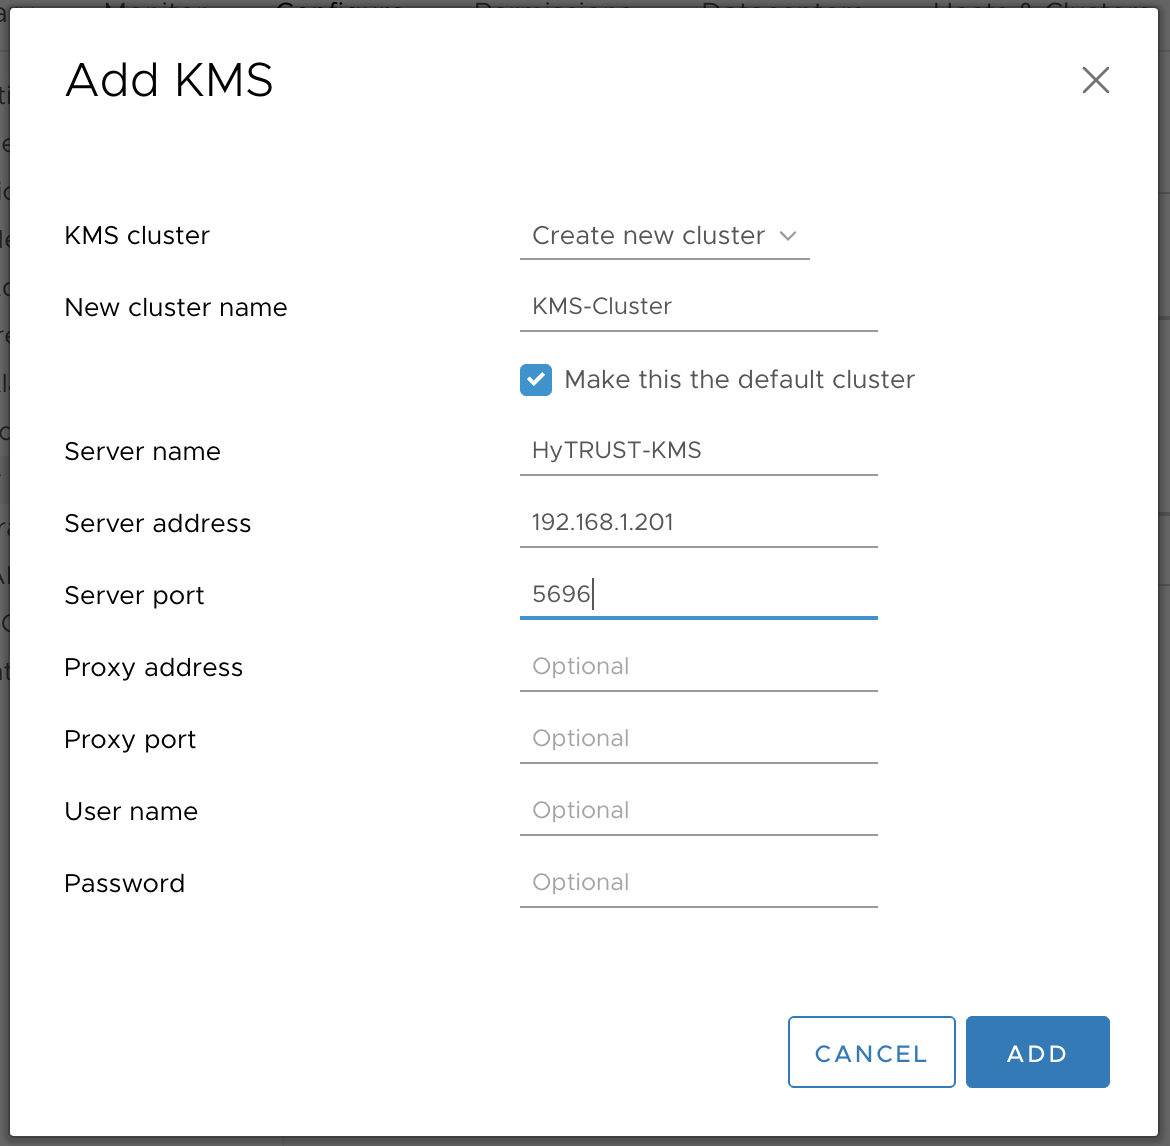 Screenshot of adding a KMS to VMware vCenter